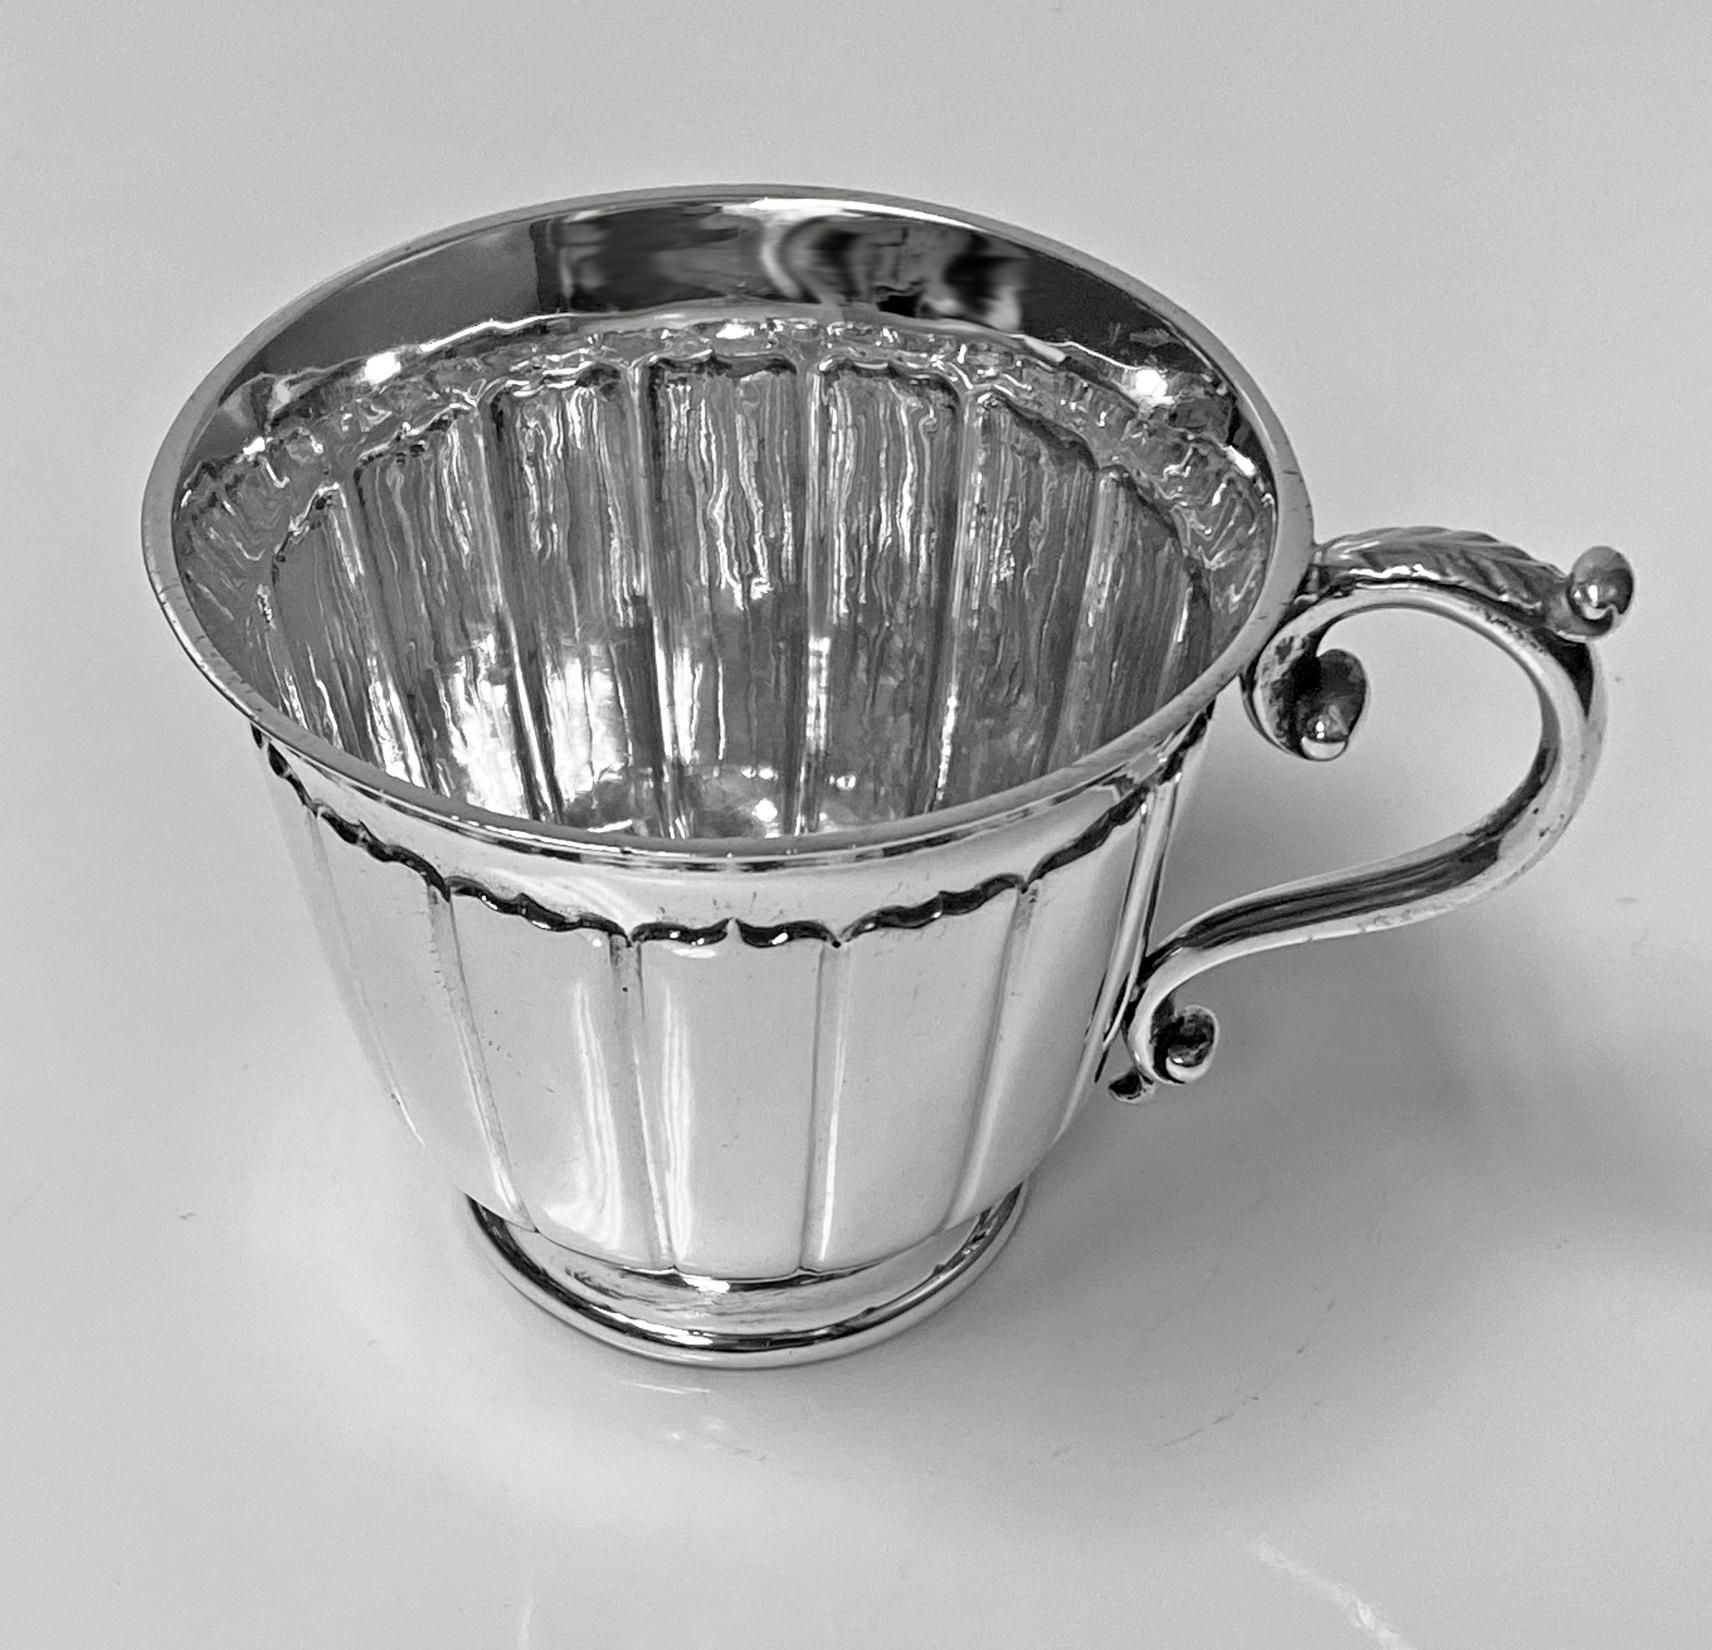 Antique sterling silver cup, London 1909 by William Comyns. The heavy gauge silver cup with panel surround, everted rim, foliate capped scroll handle. Fully hallmarked under base. Measures: Height 2.75 inches, width 4.125 inches. Item weight: 150